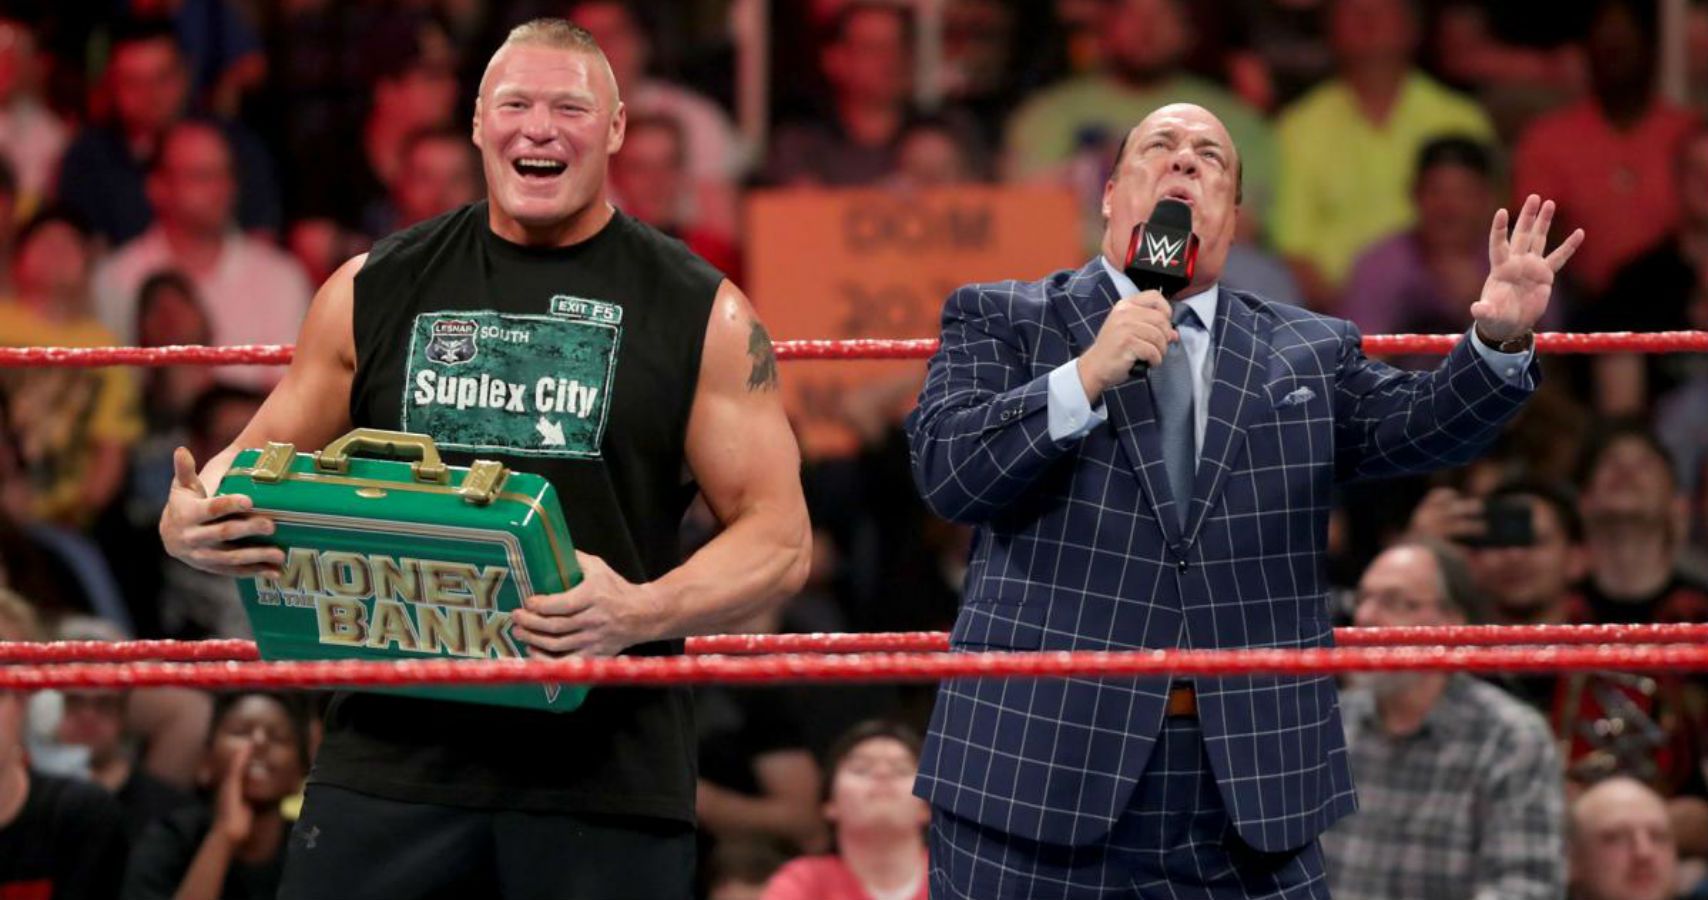 Money In The Bank Participants Didn't Know About Brock Lesnar Until His